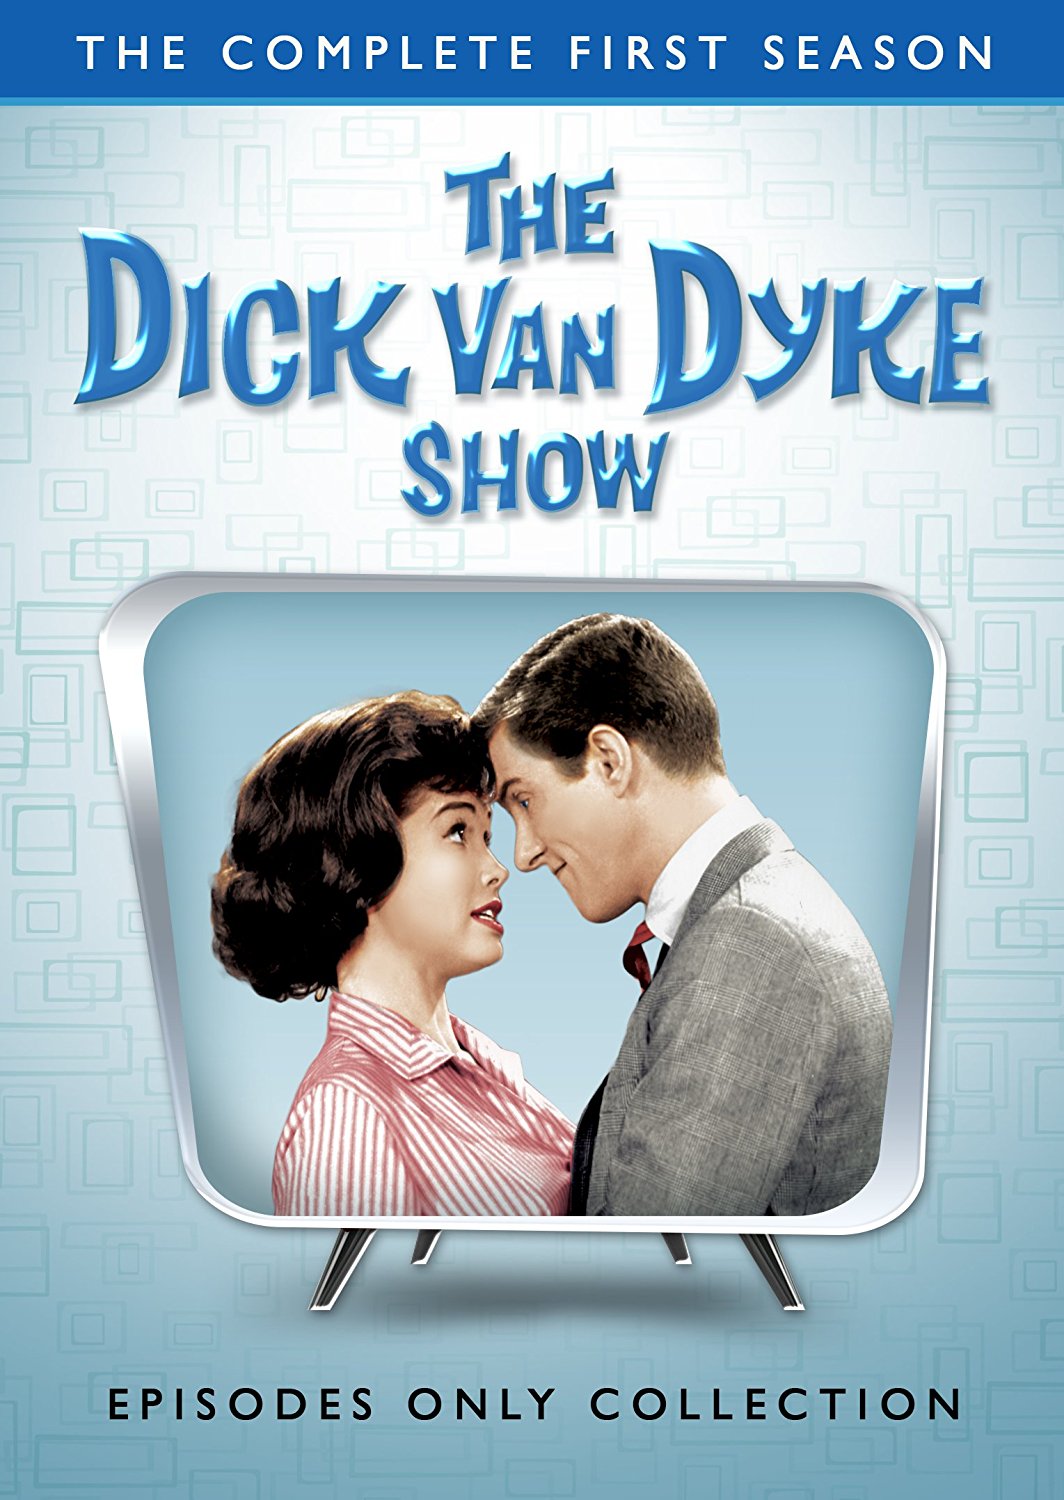 Dick van dyke show only child